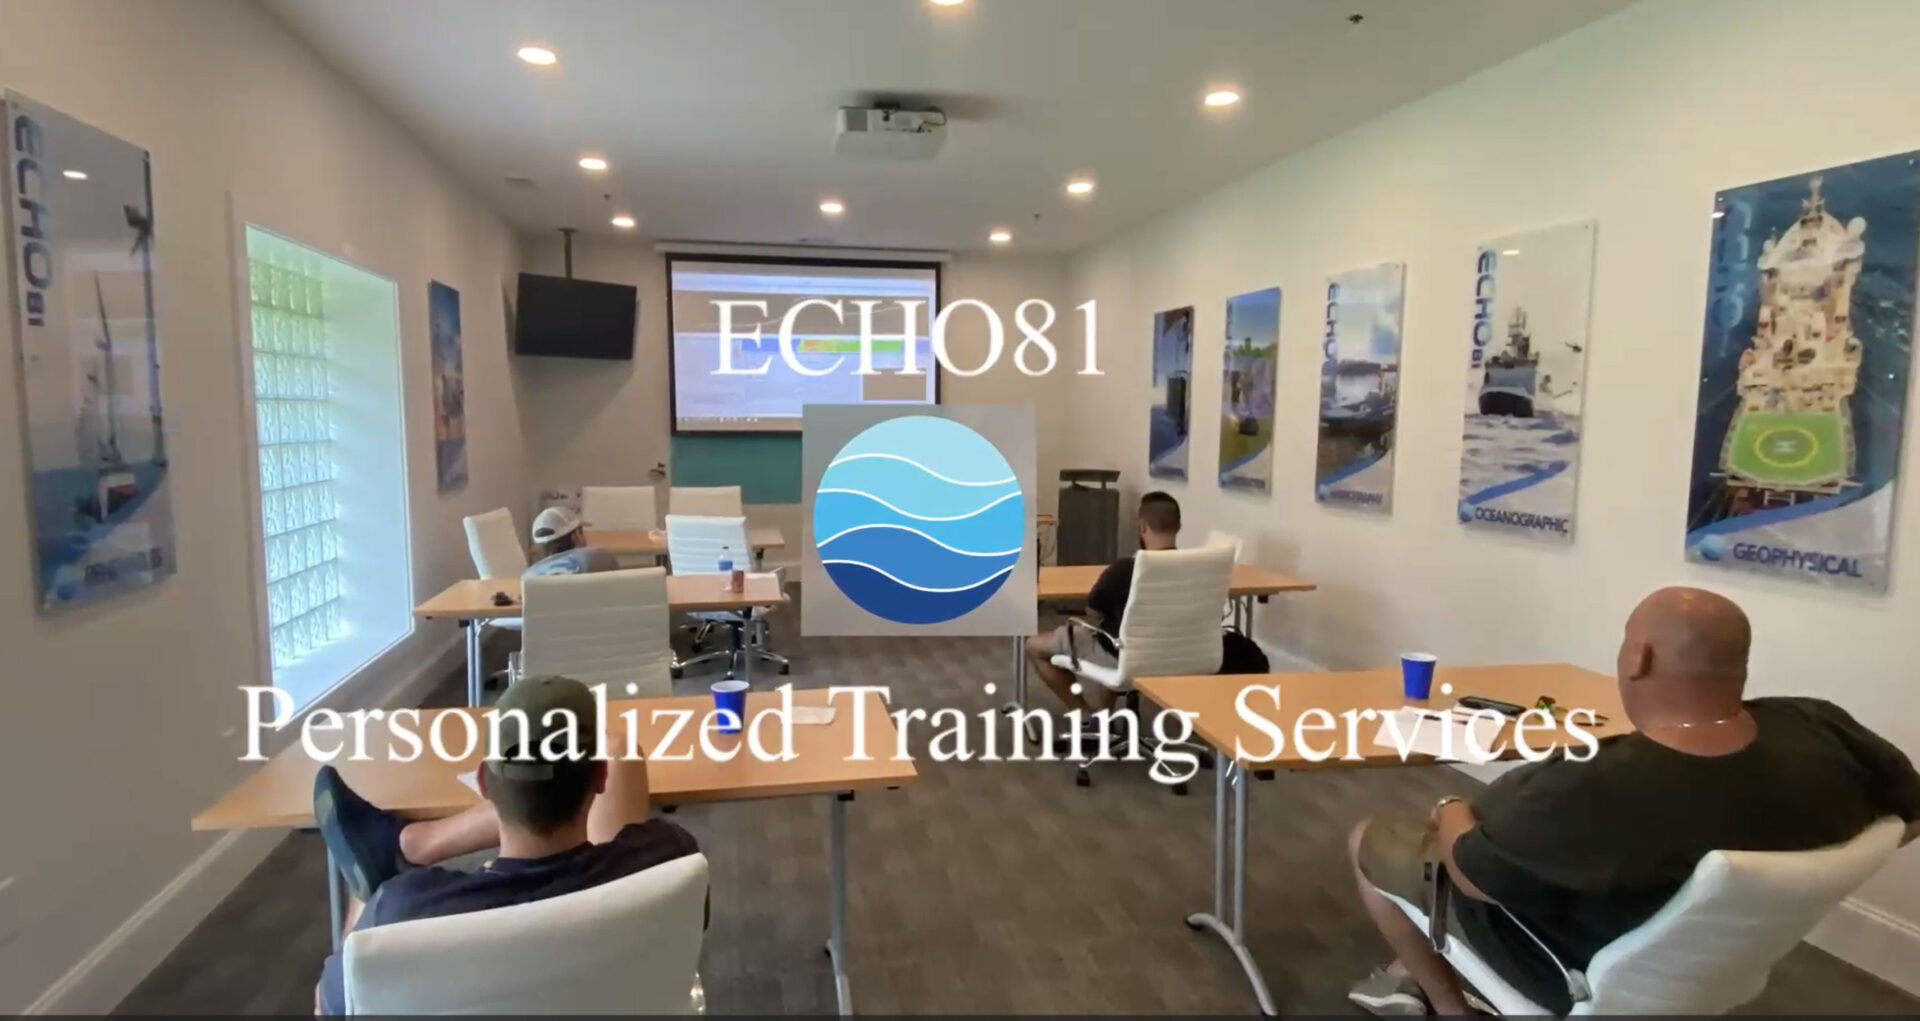 ECHO81 Personalized Training Services. ECHO81 is Premier Supplier of Underwater Survey Technologies Rental Sales Training Offshore Hydrography Geophysics.